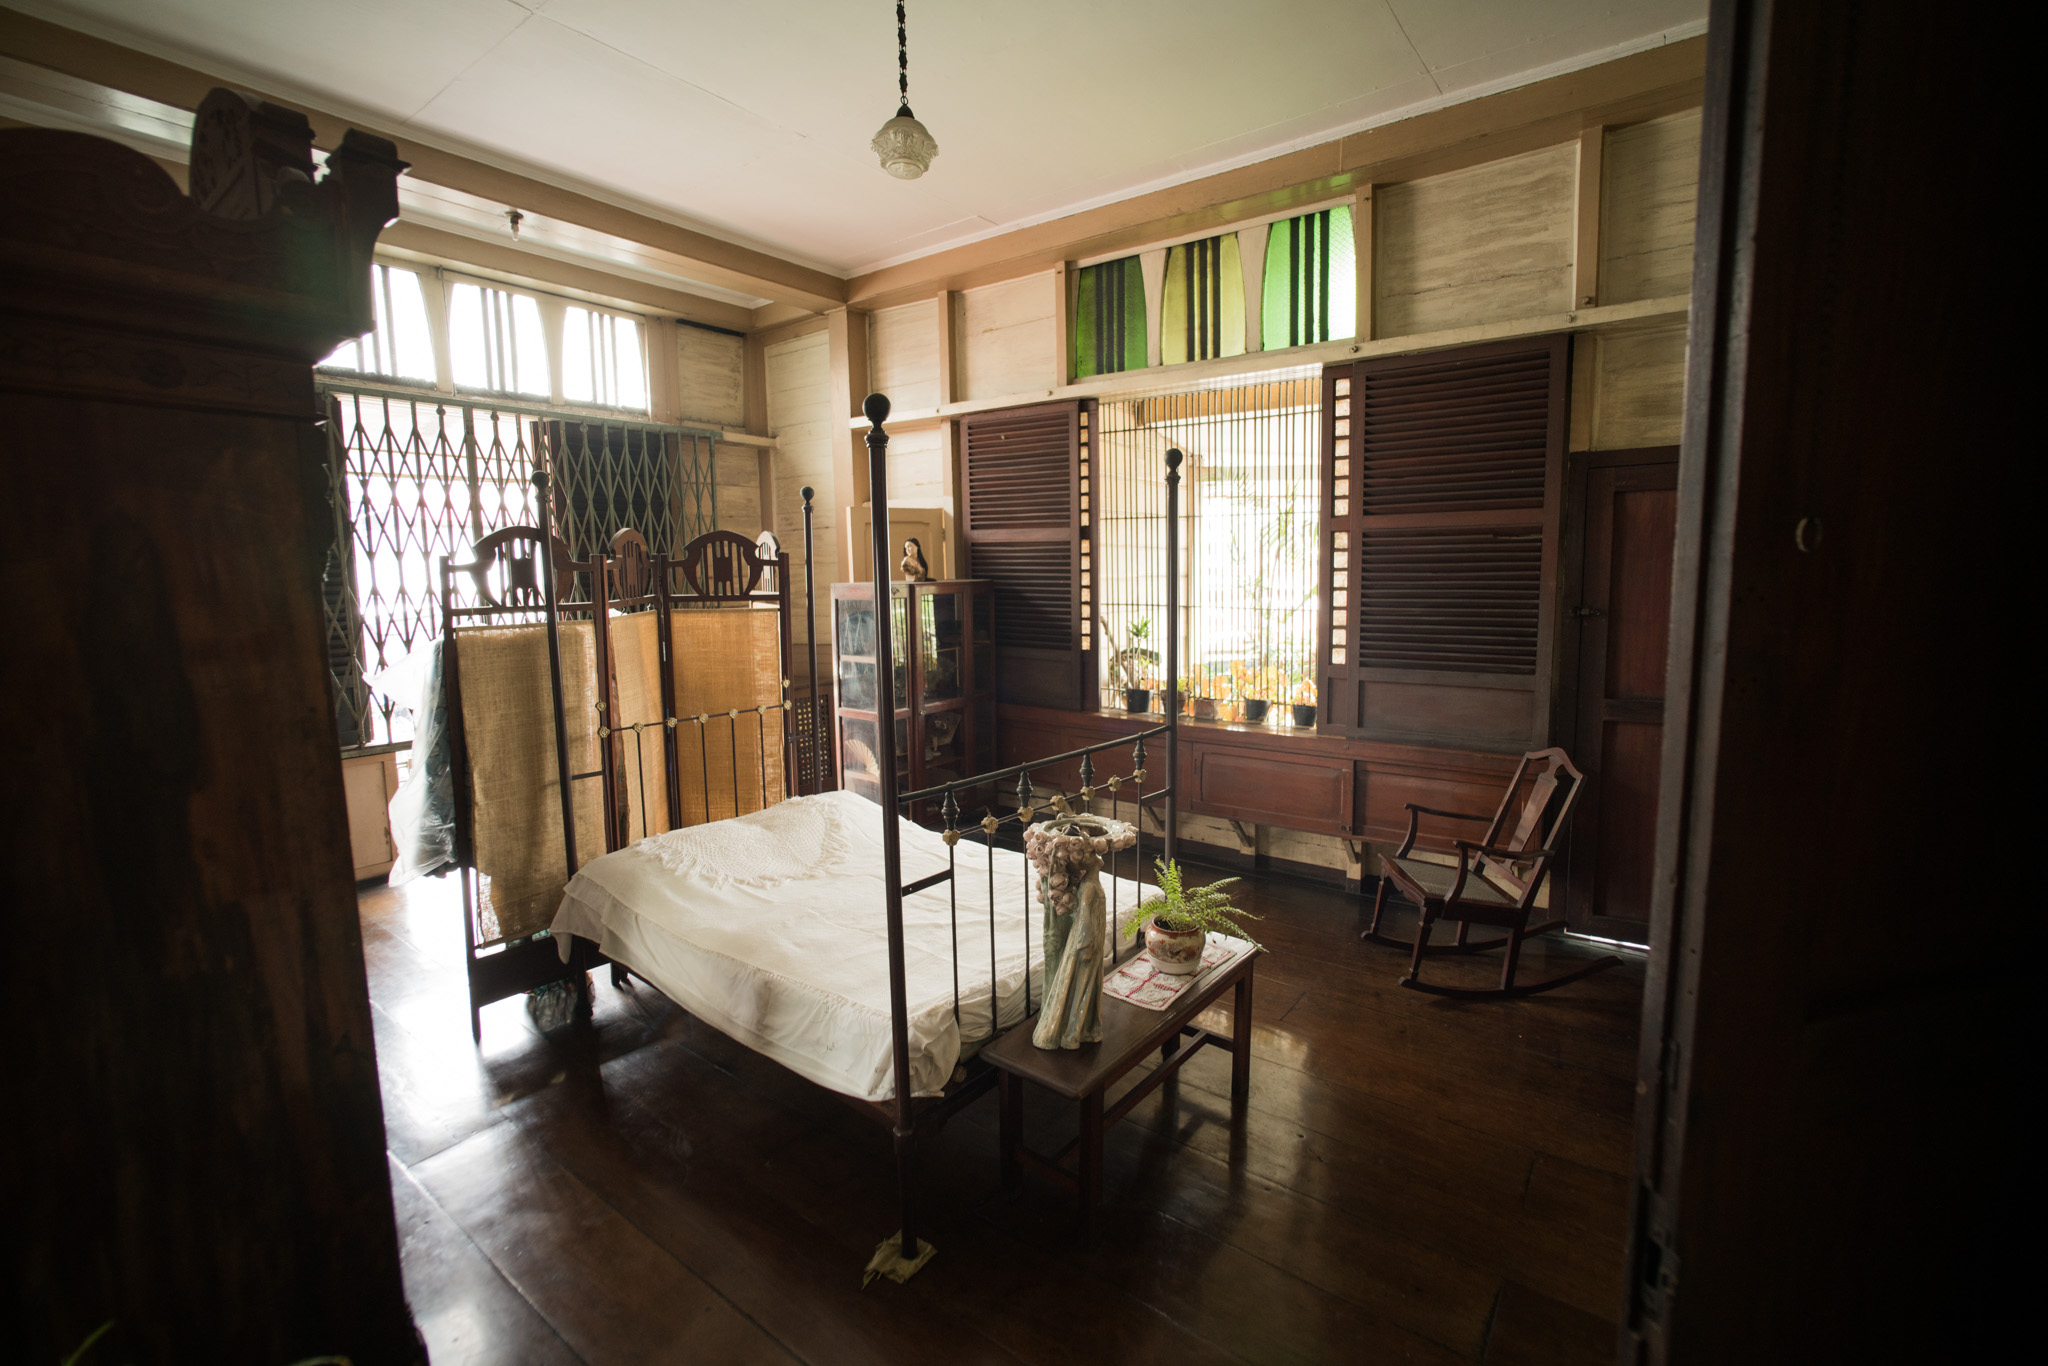 A Quiapo ancestral house fights for survival